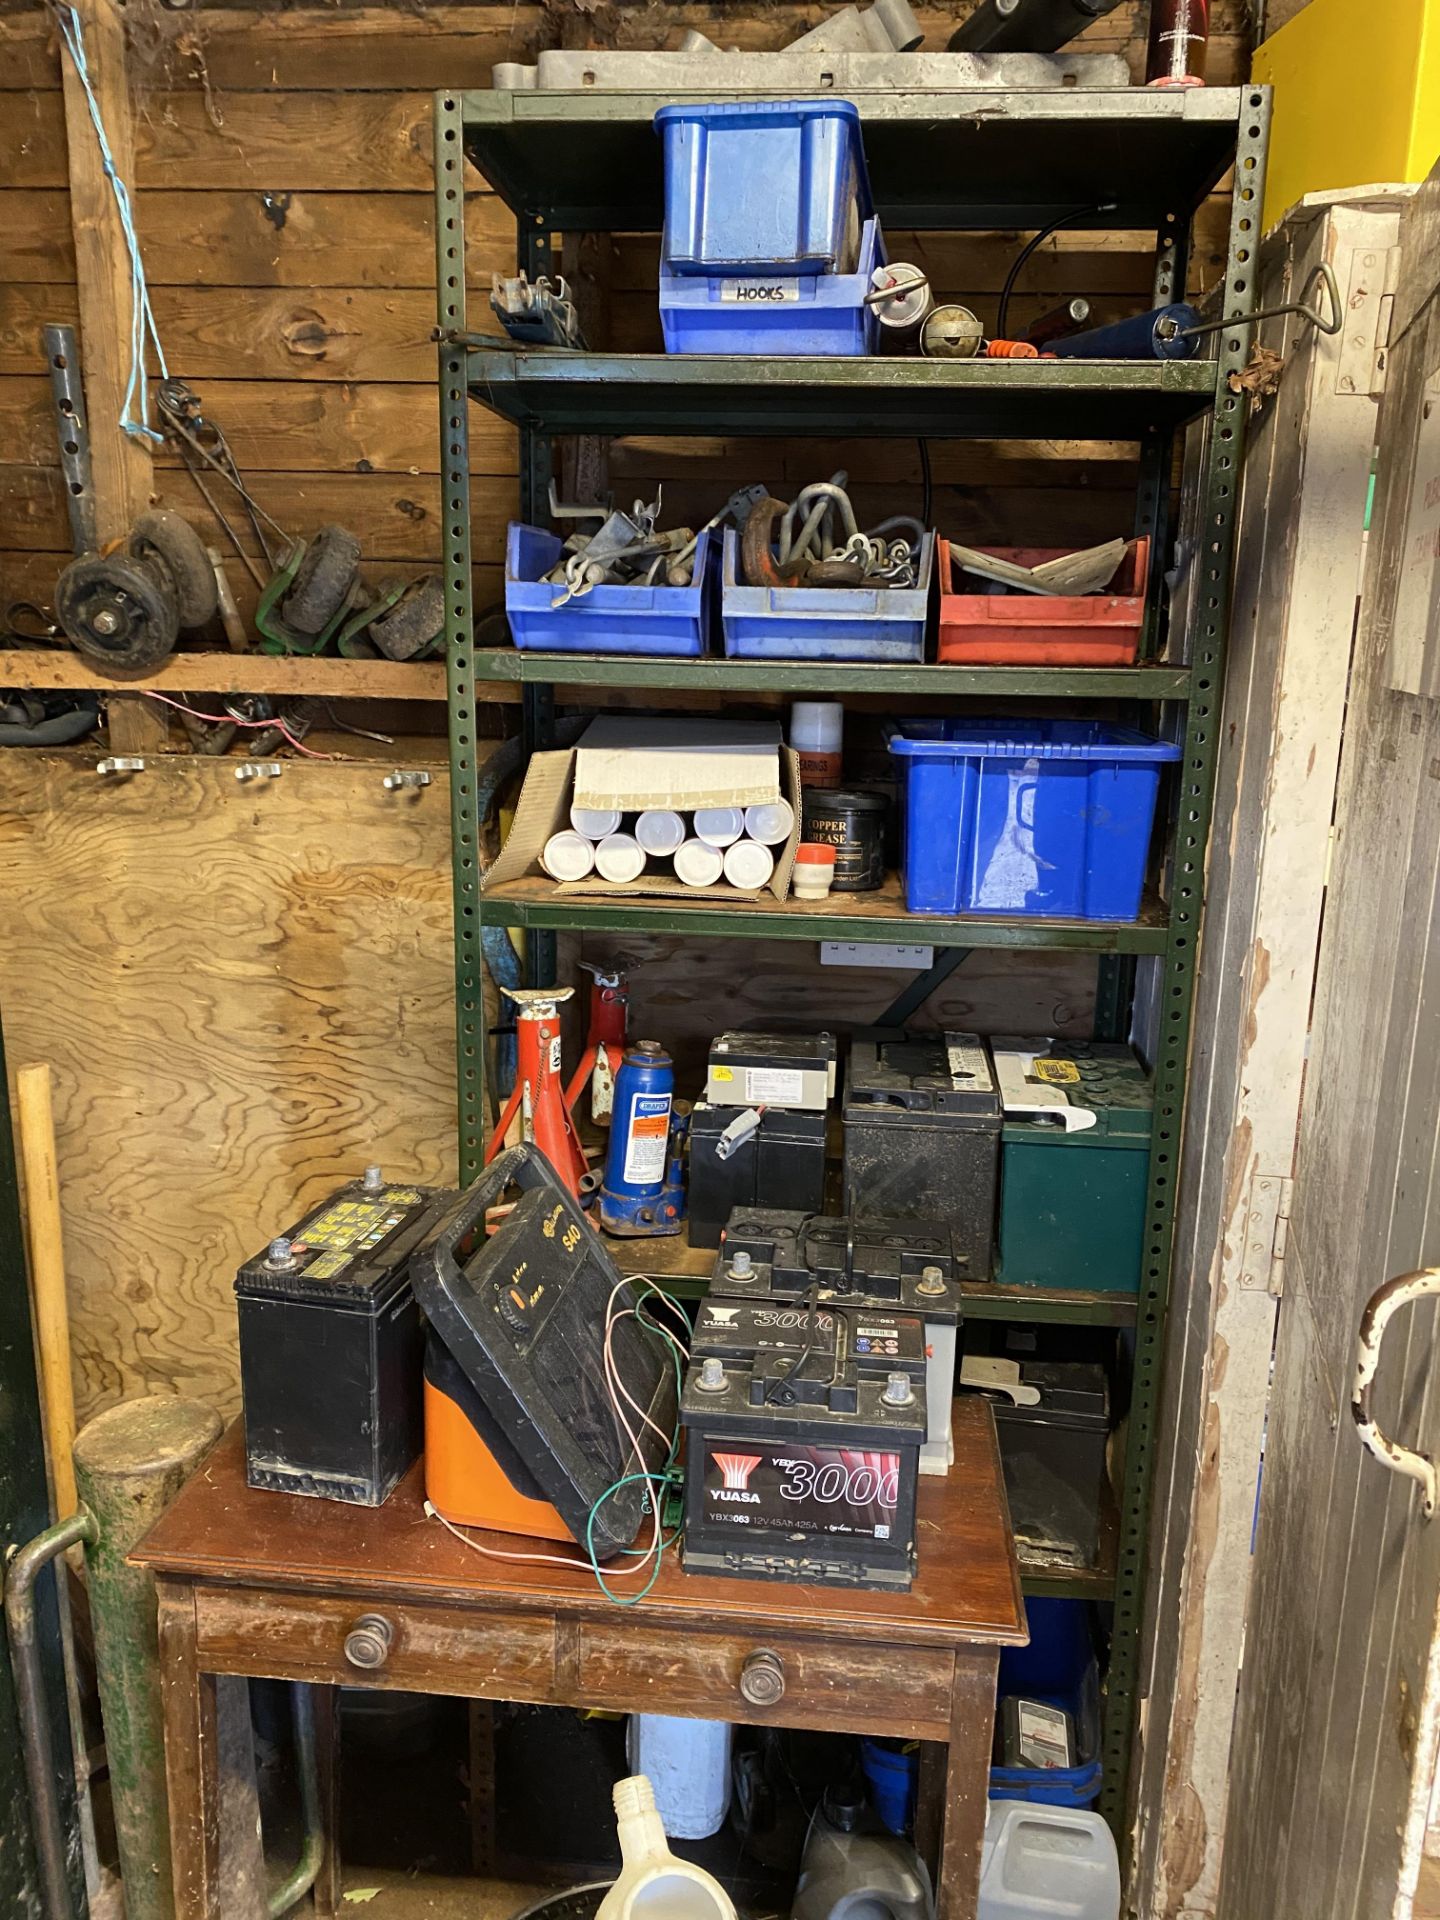 Contents of store including hand tools, Gallagher 540 electric fence system, angle grinder, - Image 4 of 7